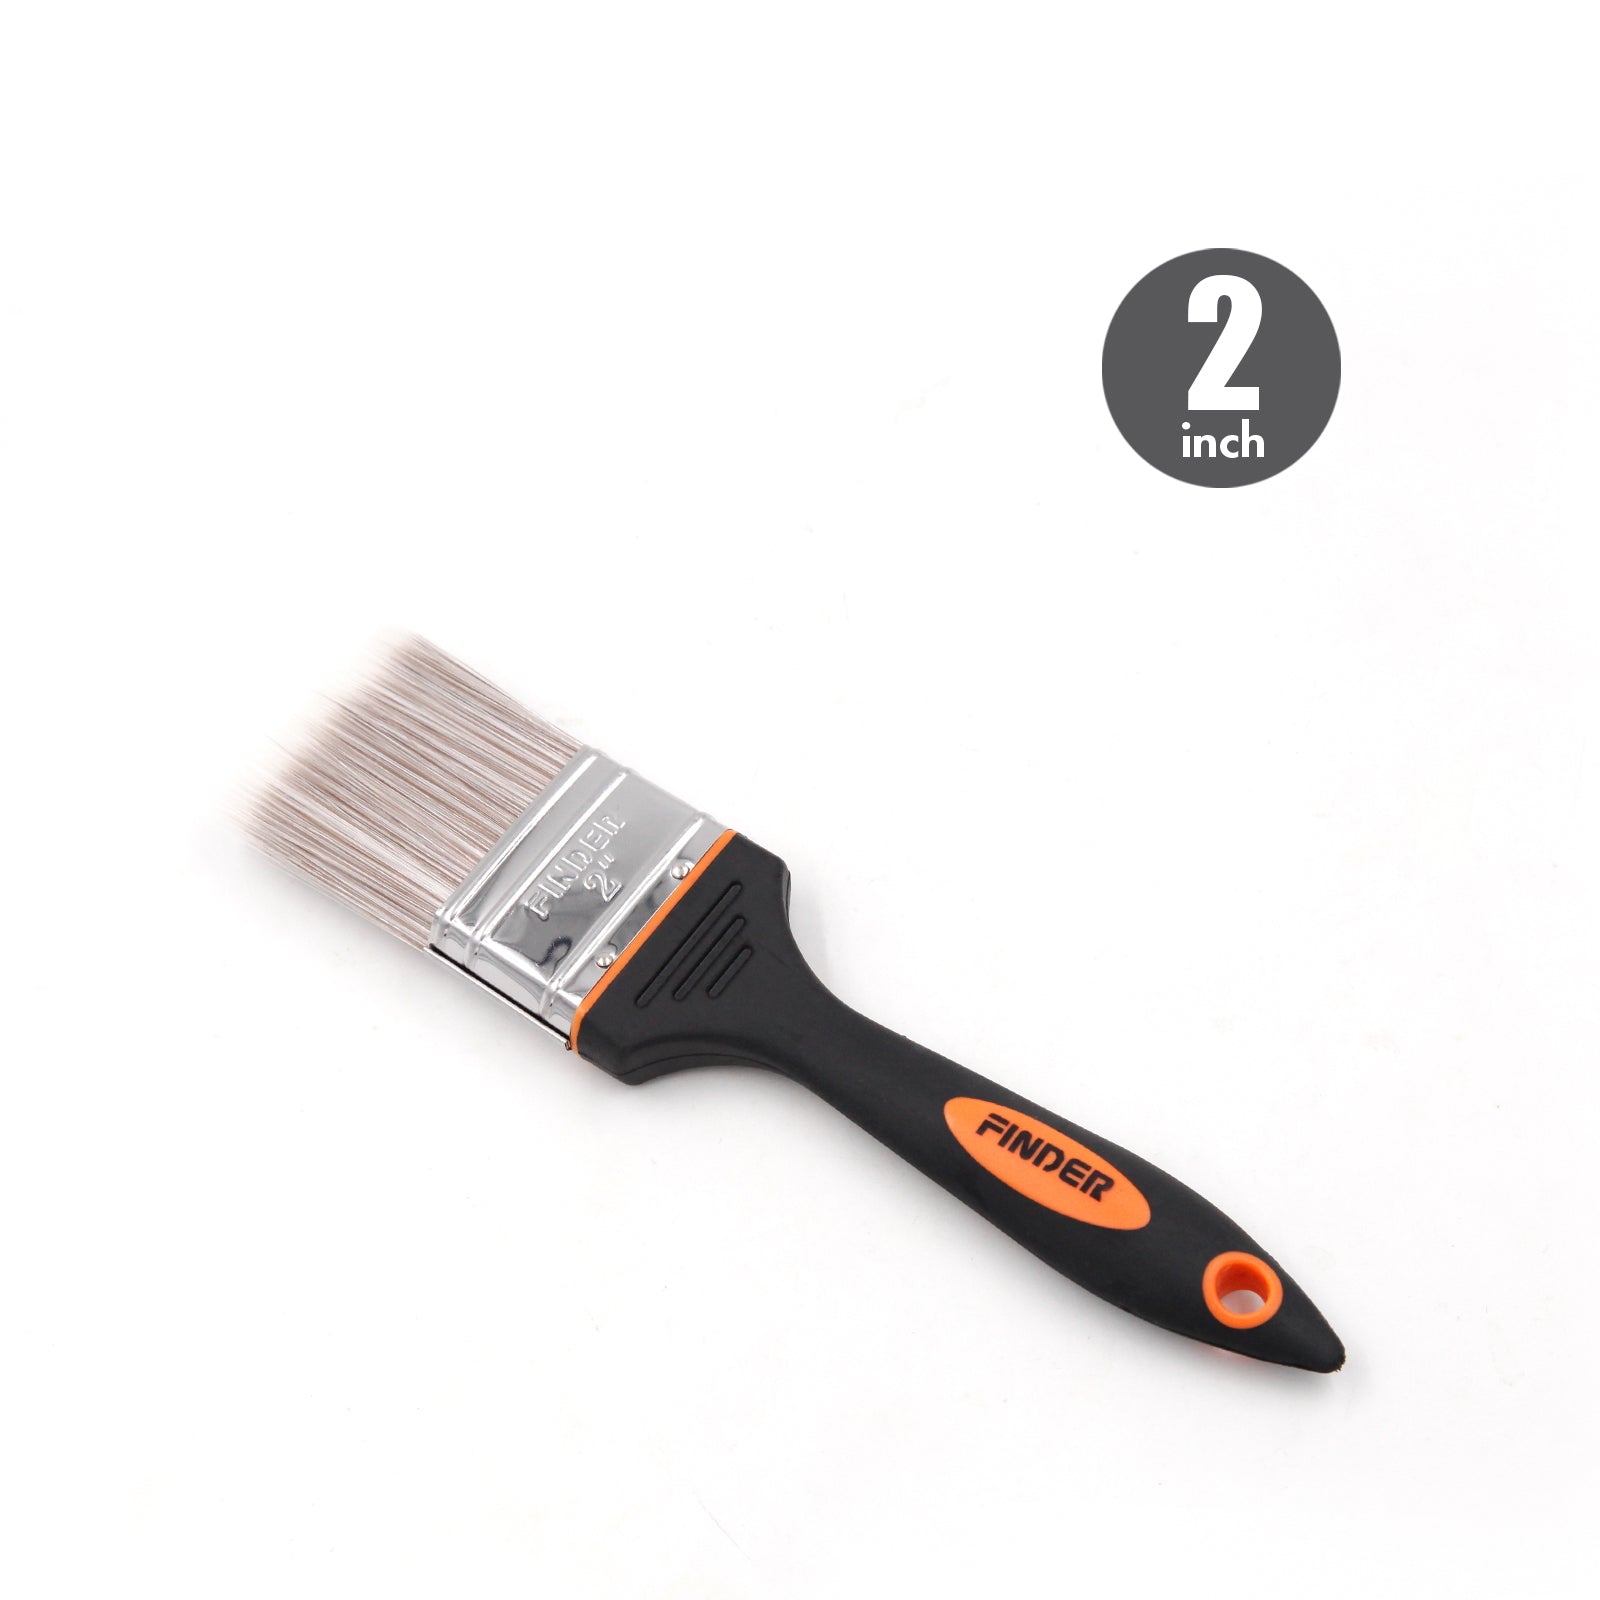 FINDER - 100% Polyester Painting Brush (2 Inch)